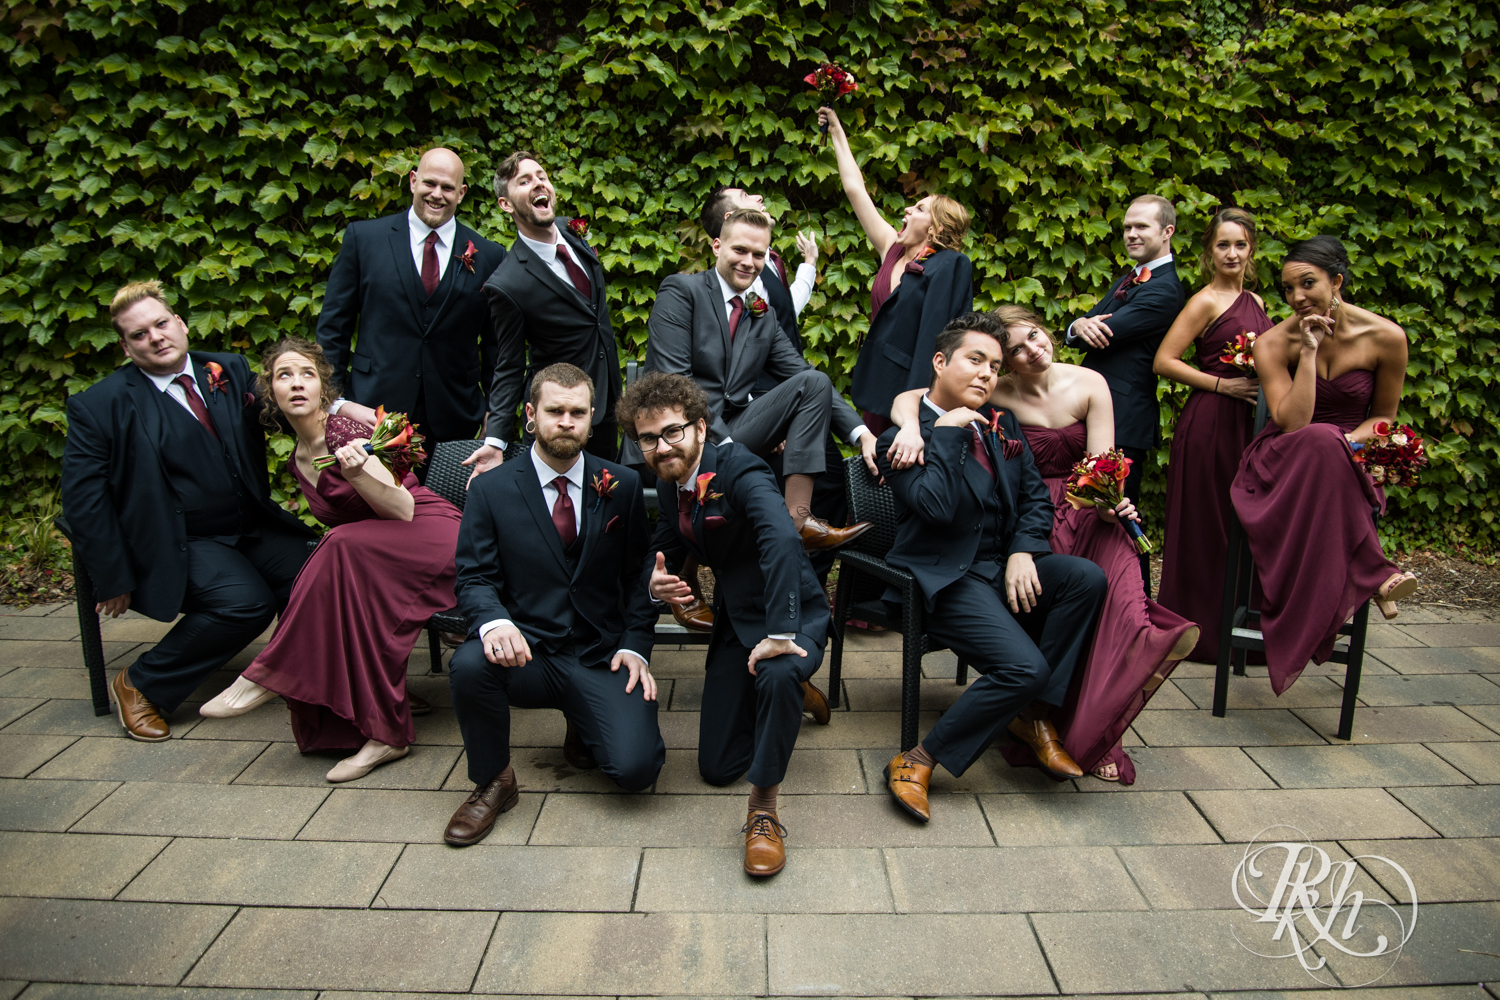 Wedding party poses with grooms in Minneapolis, Minnesota for Minnesota LGBT wedding photographer.